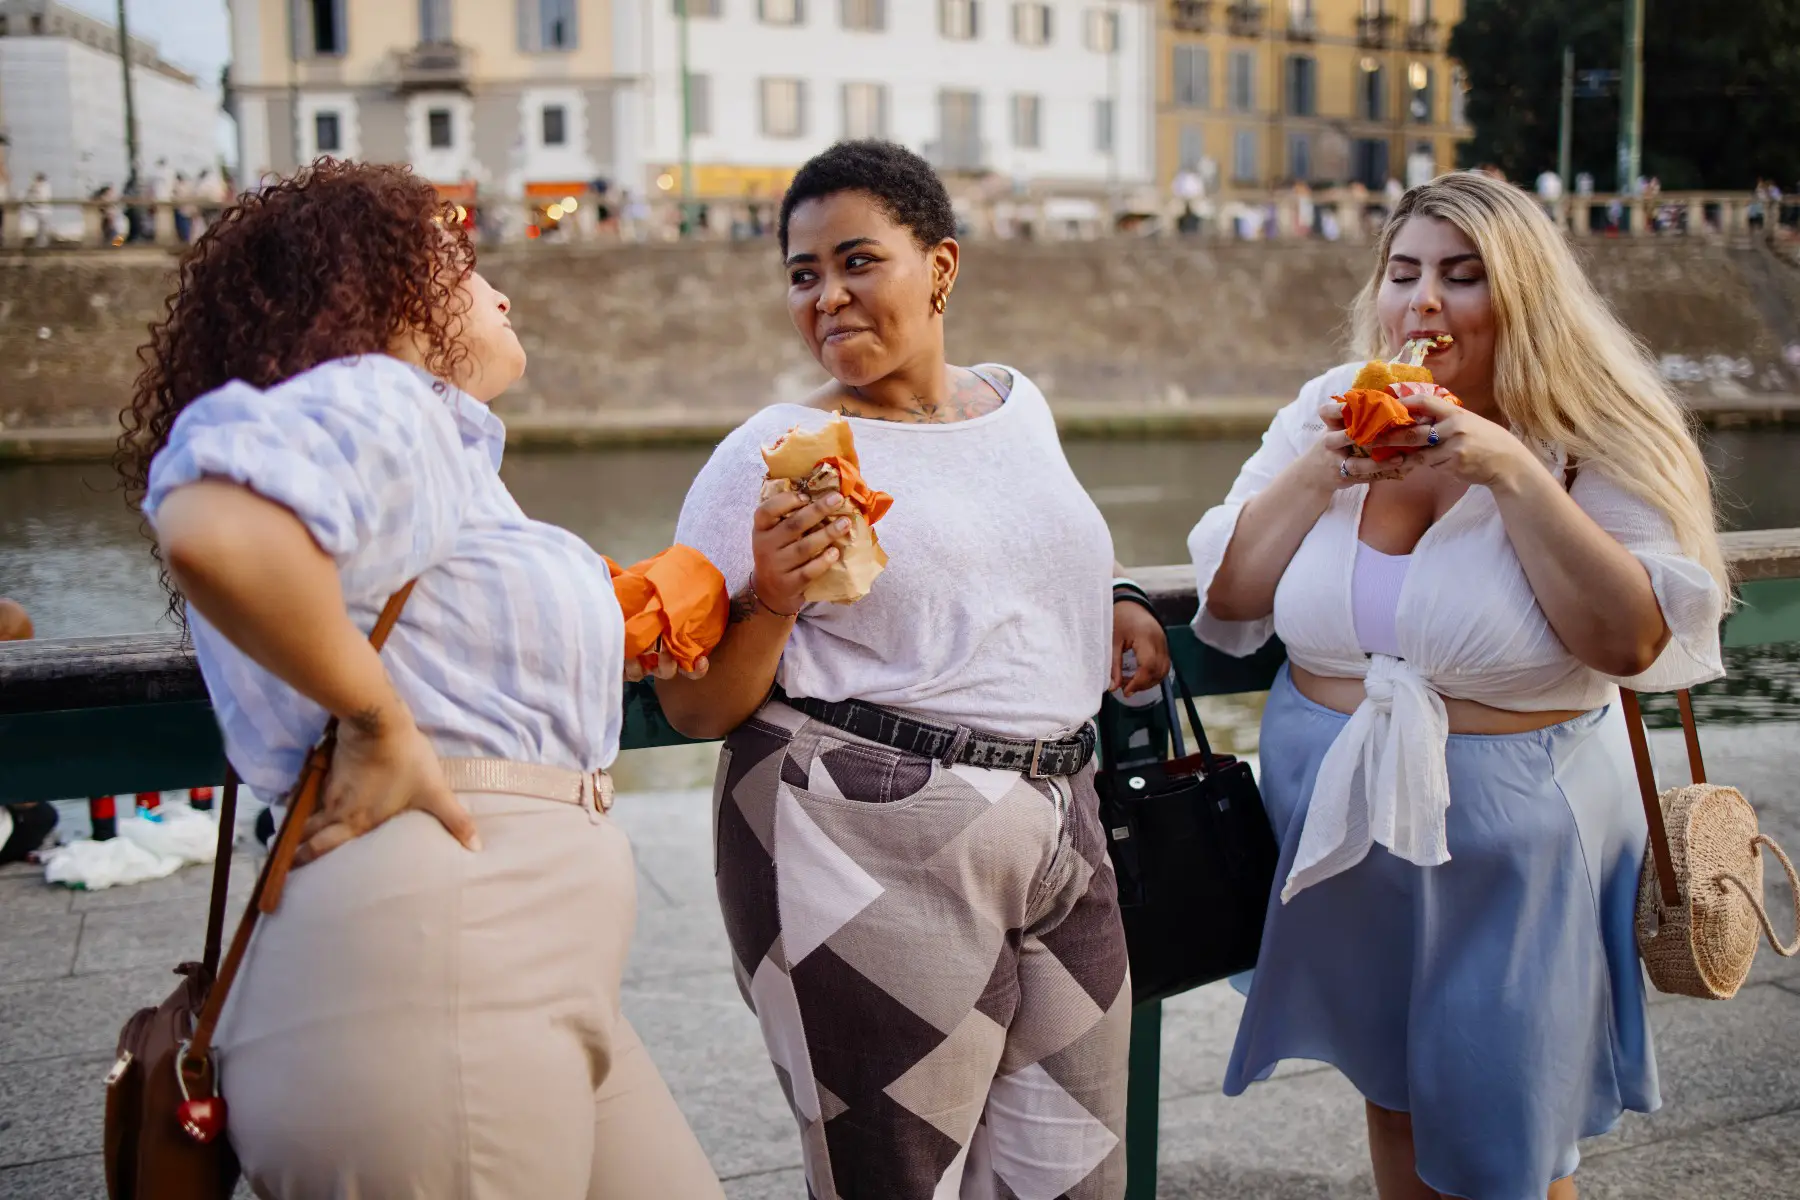 Three friends enjoying a snack on the go in the Navigli District in Milan, Italy. The blond woman is thoroughly enjoying an arancini.